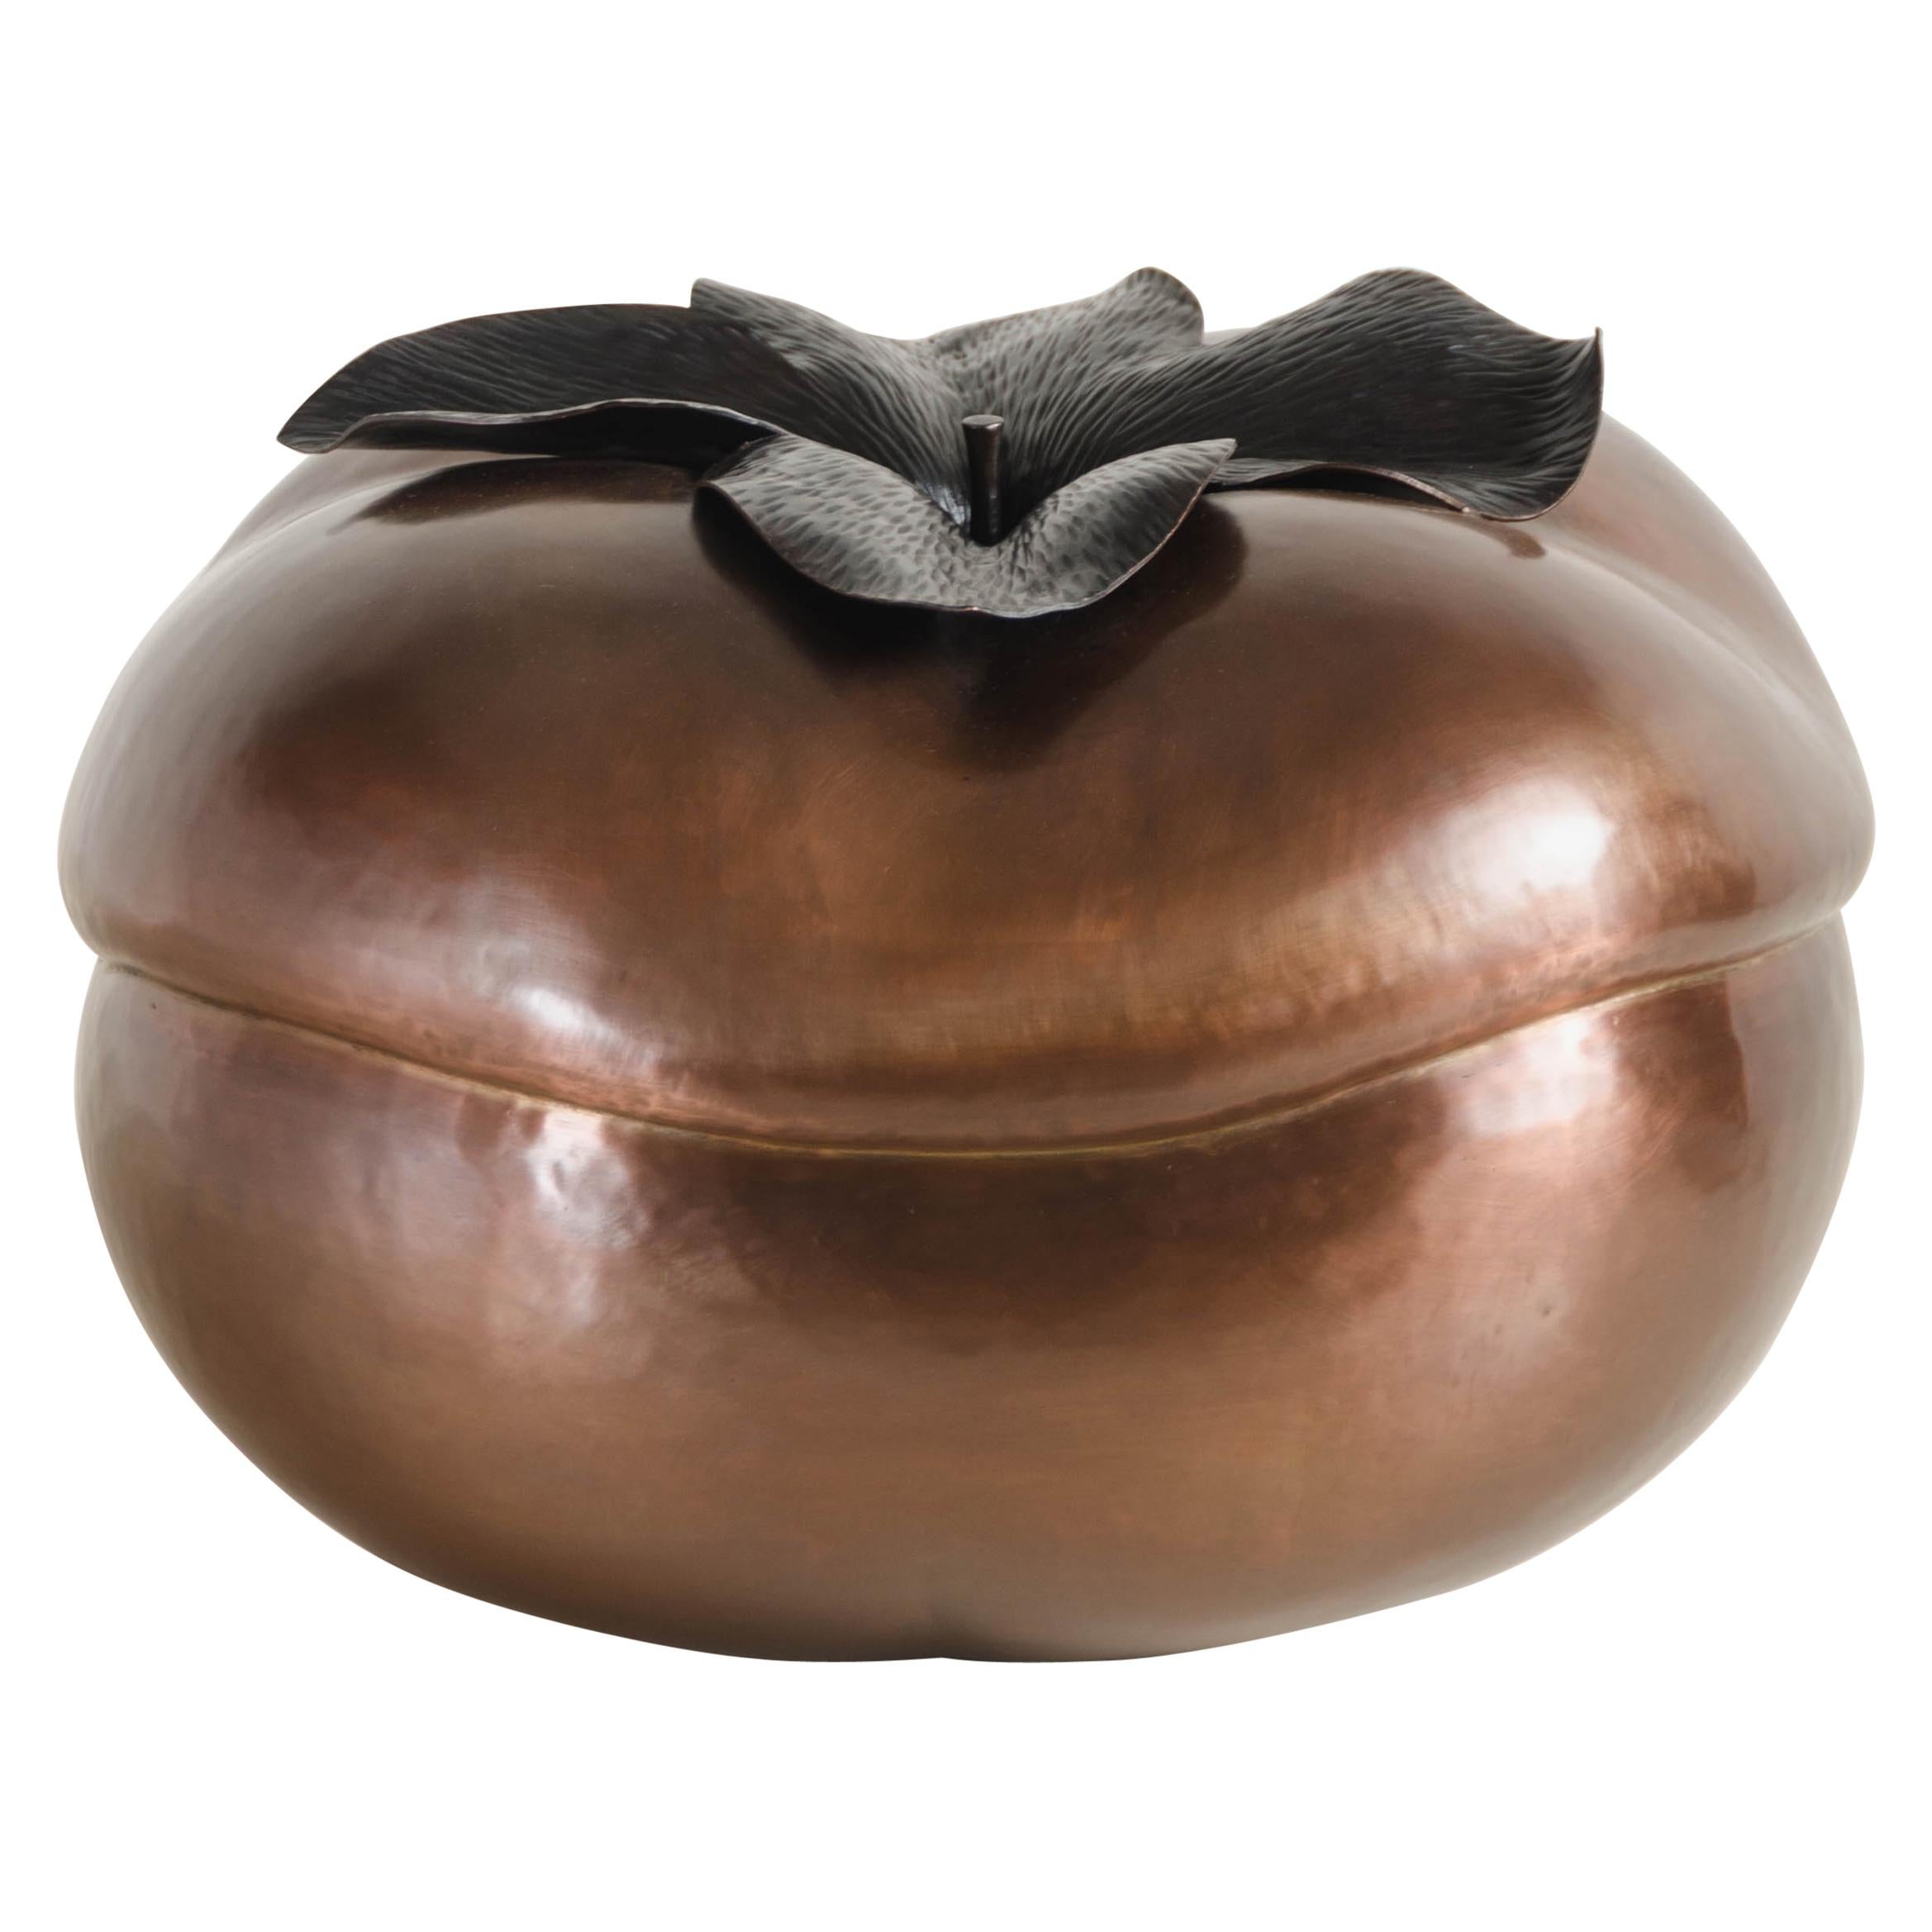 Persimmon Sculpture, Copper by Robert Kuo, Hand Repousse, Limited Edition